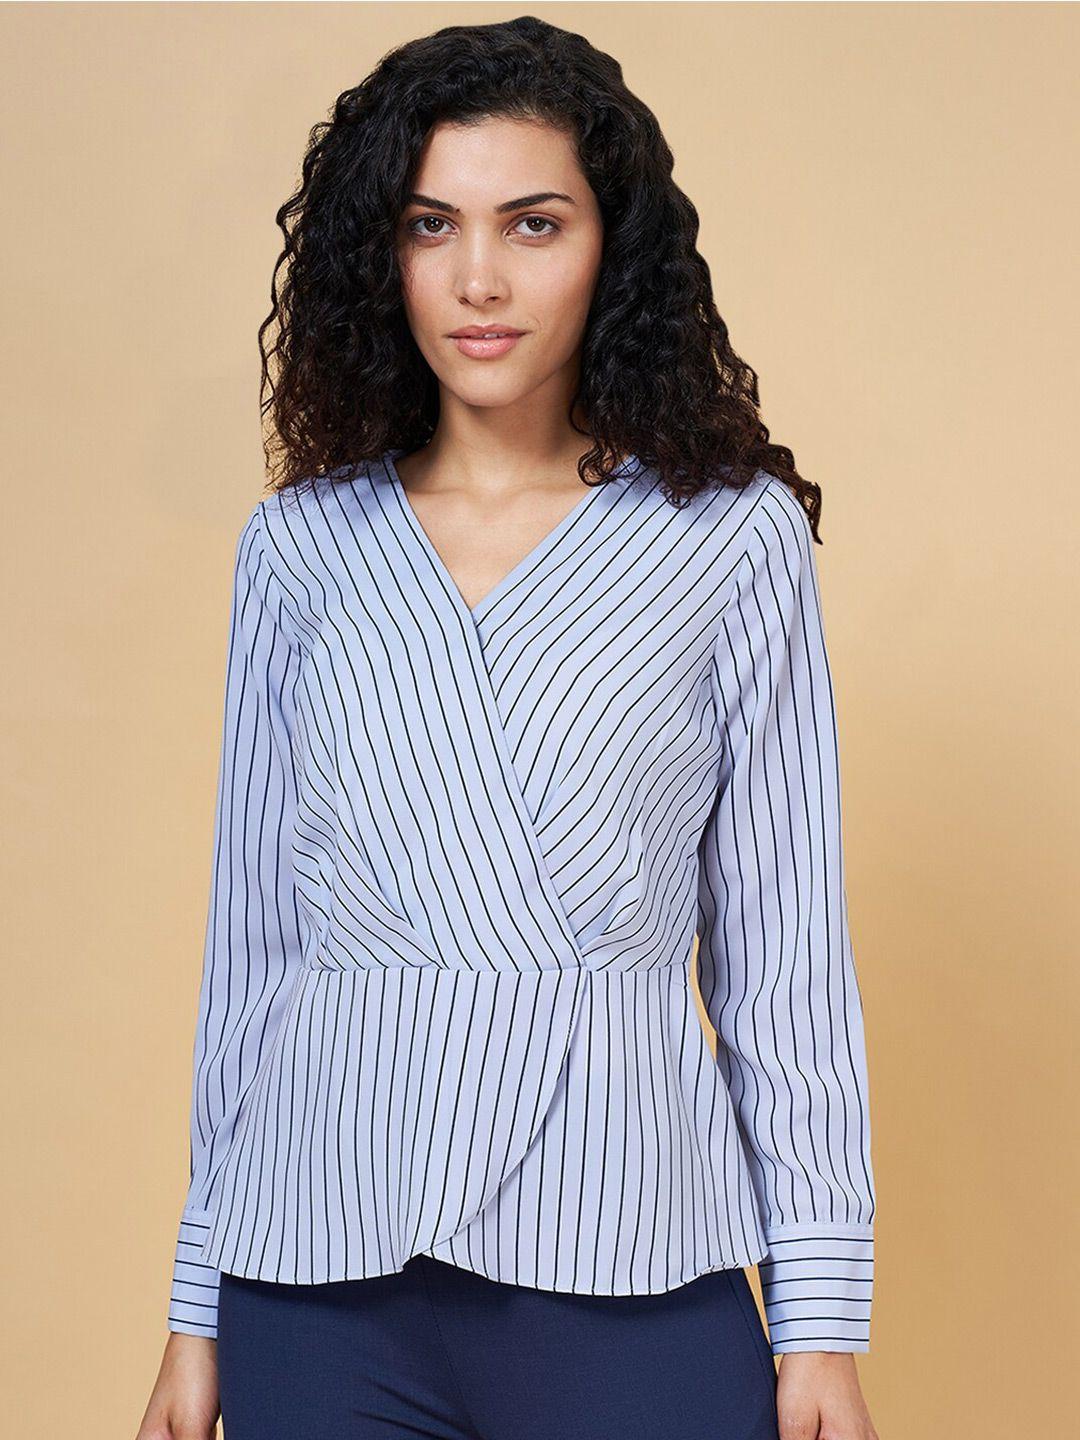 annabelle by pantaloons striped wrap regular top